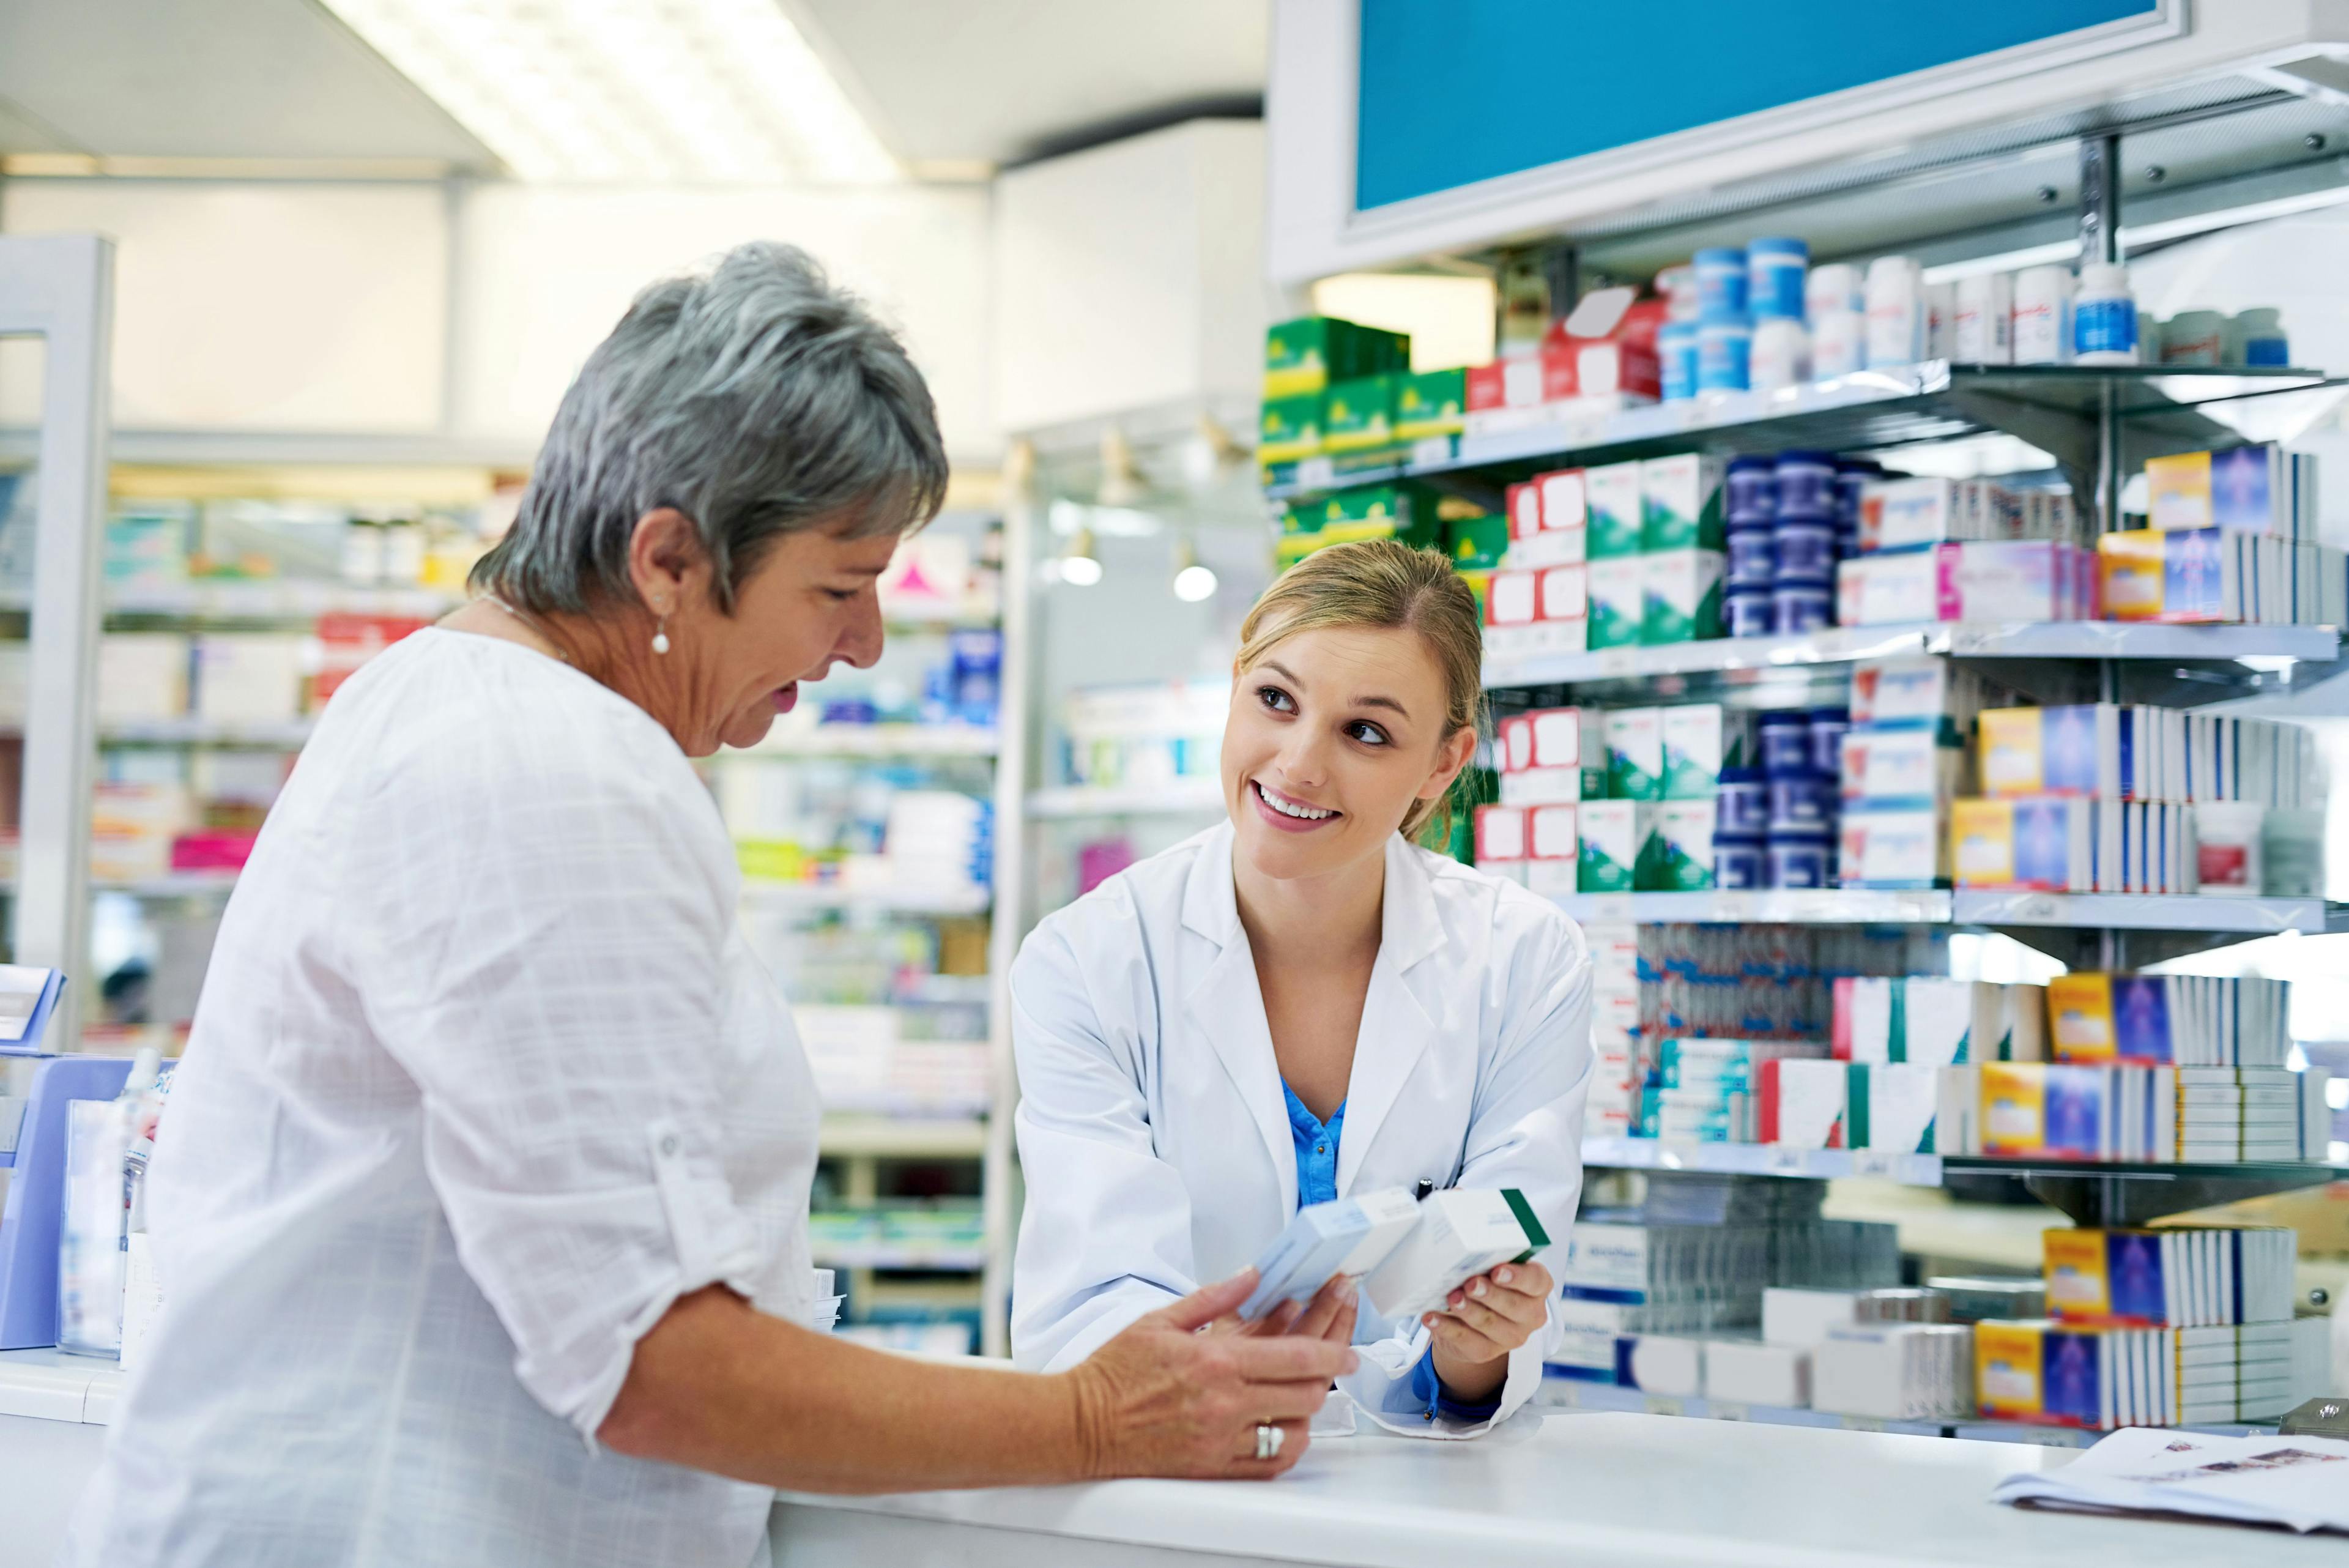 Nontraditional Pharmacy Models Can Benefit Patients, Pharmacists